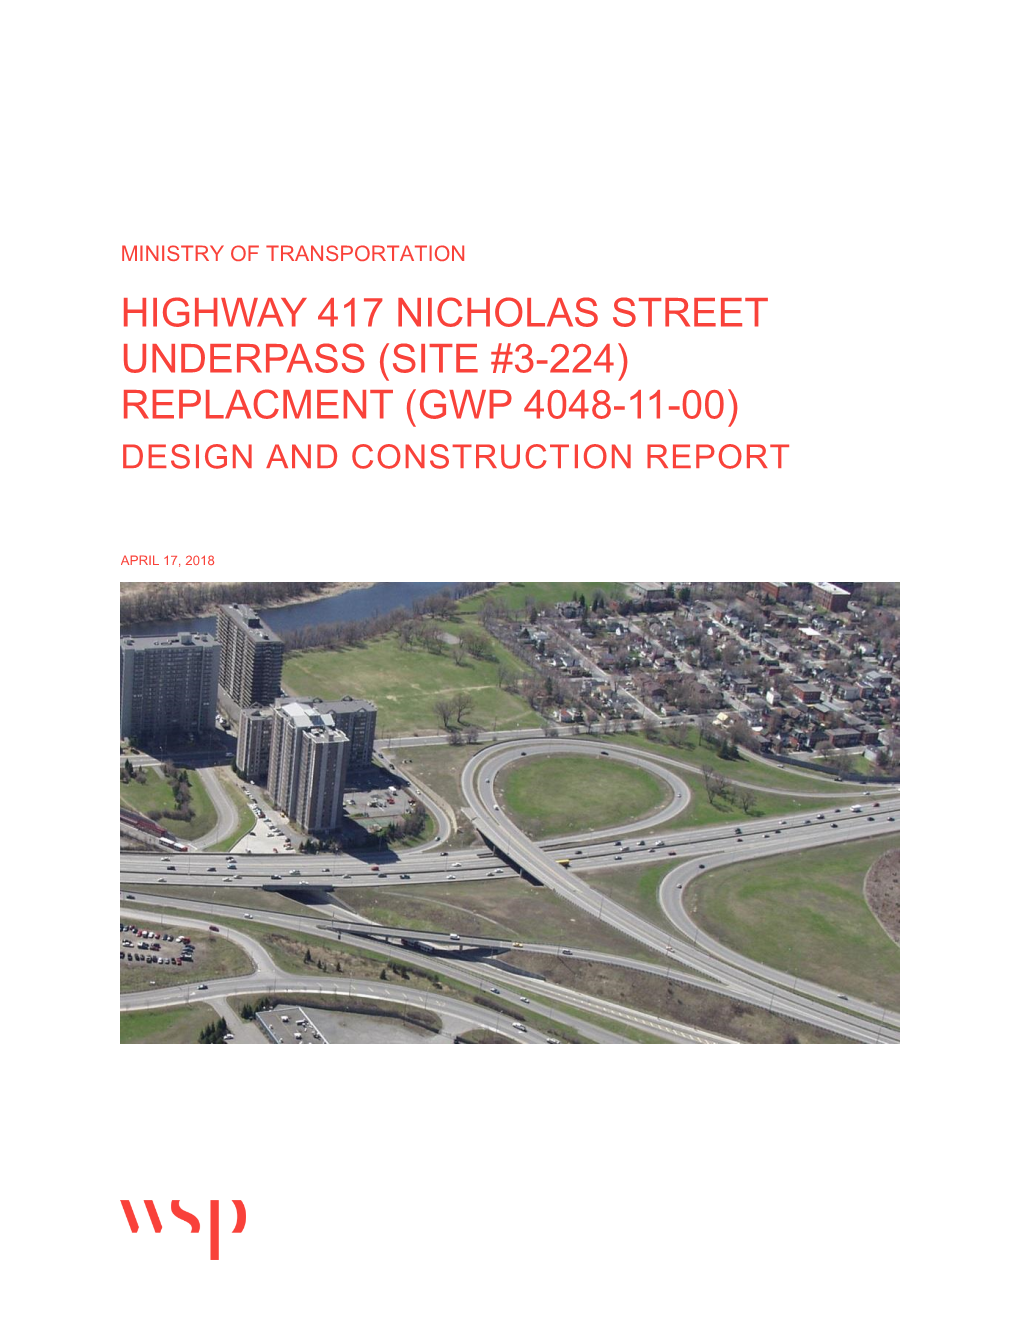 Highway 417 Nicholas Street Underpass (Site #3-224) Replacment (Gwp 4048-11-00) Design and Construction Report